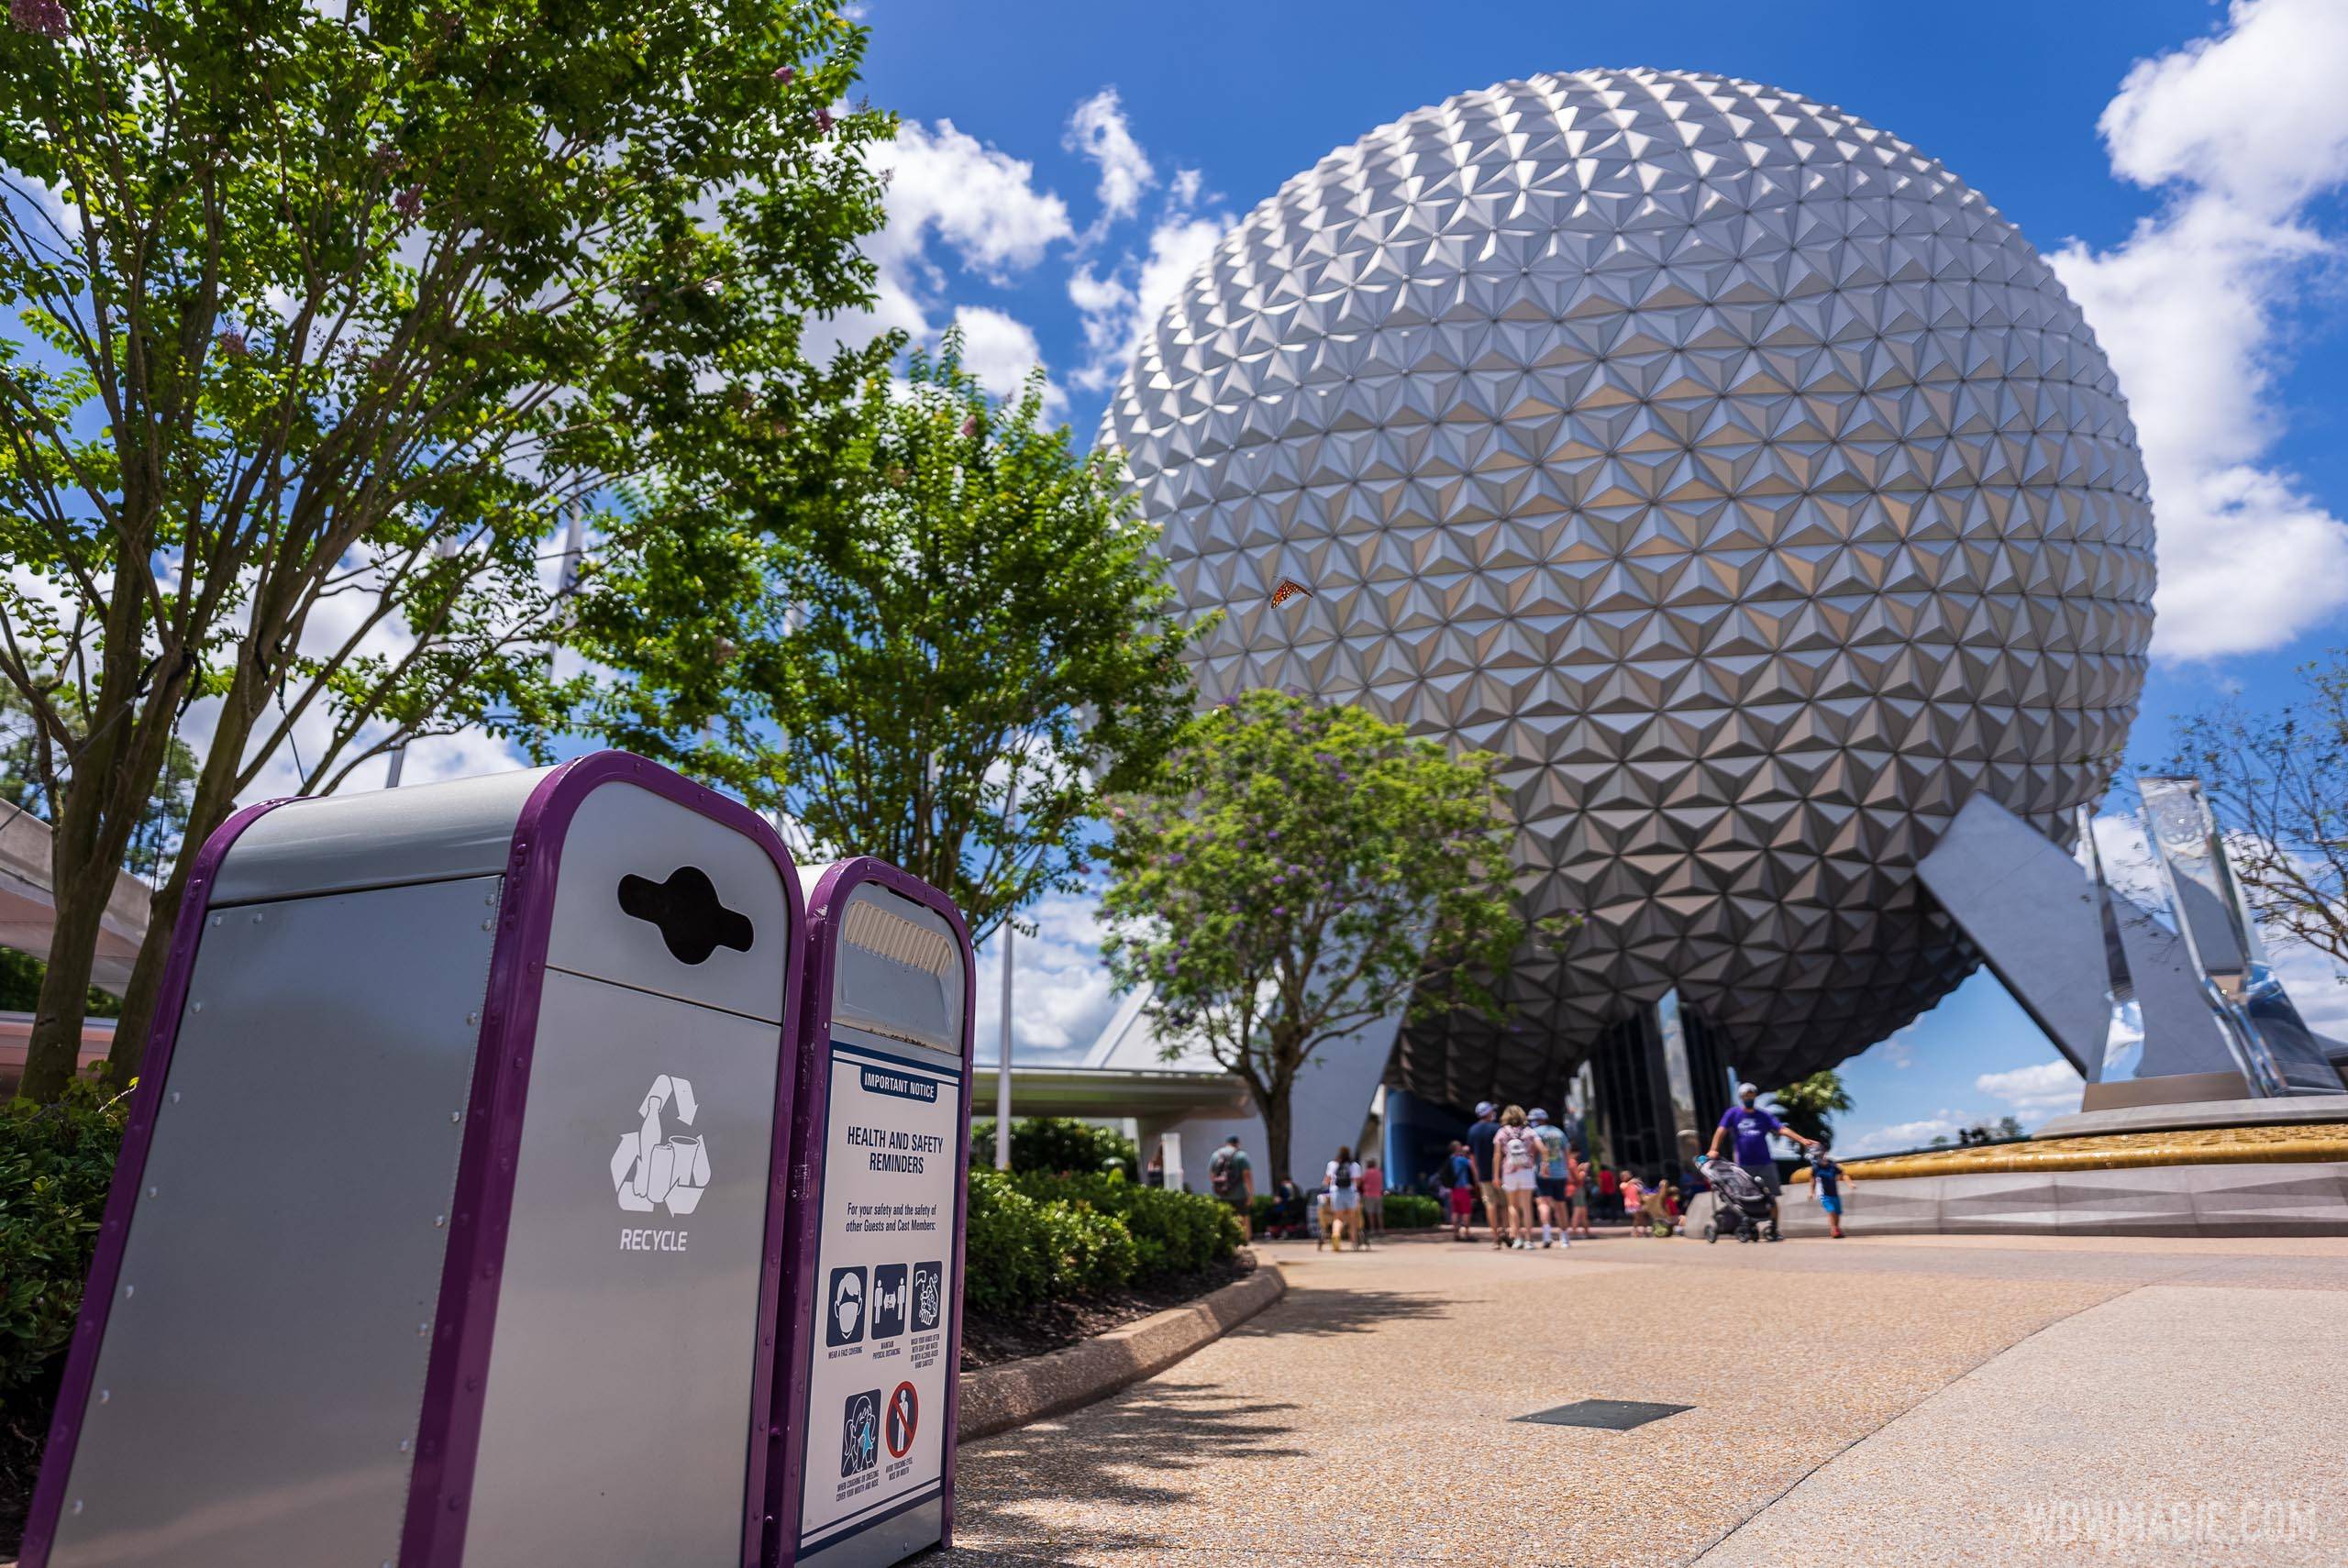 Disney World's trash cans are closed once again